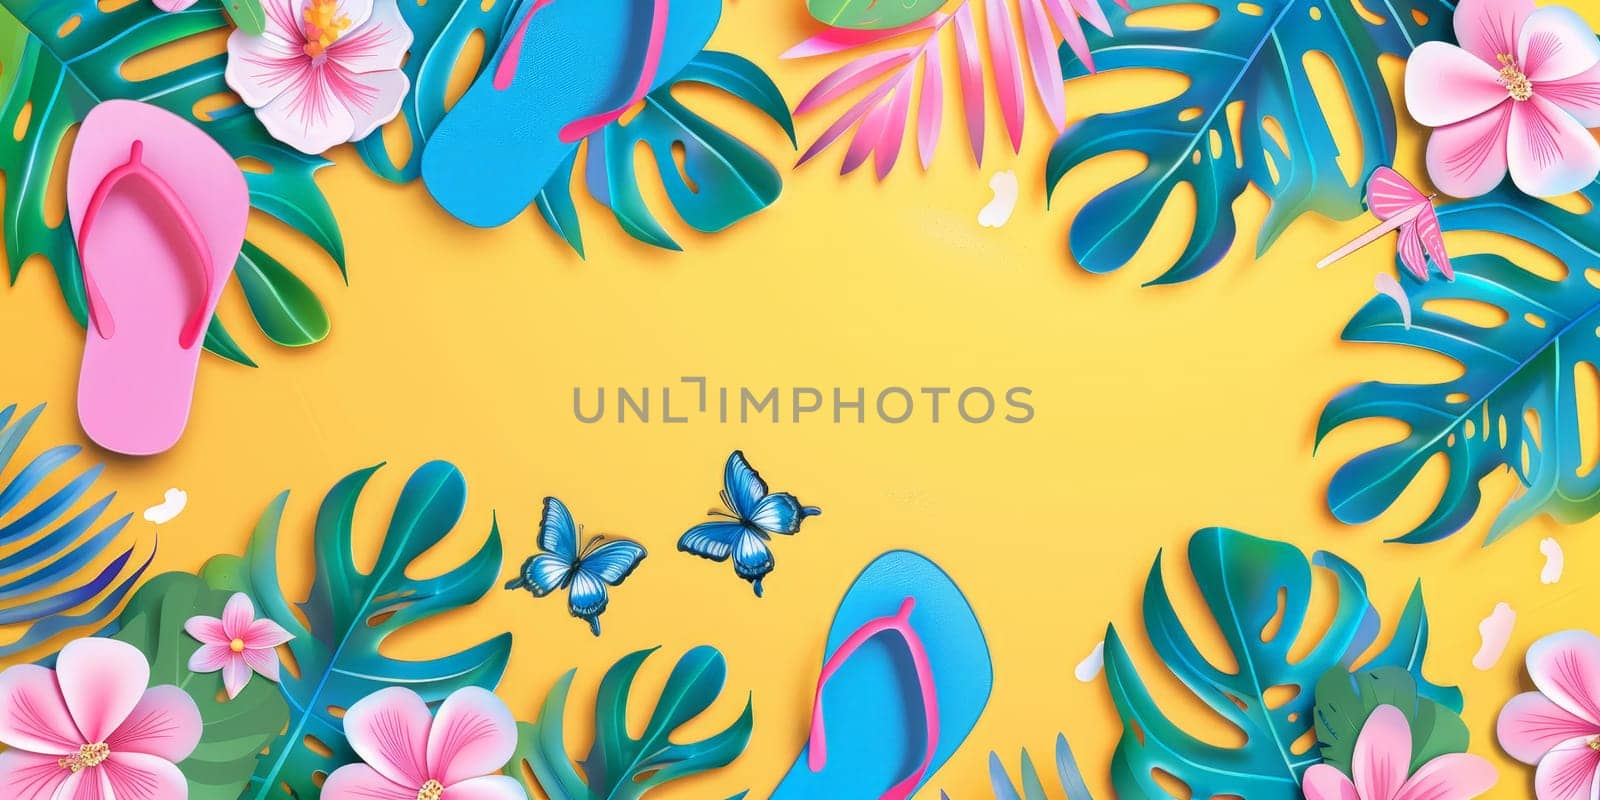 A yellow background with a bunch of flowers and a pair of flip flops